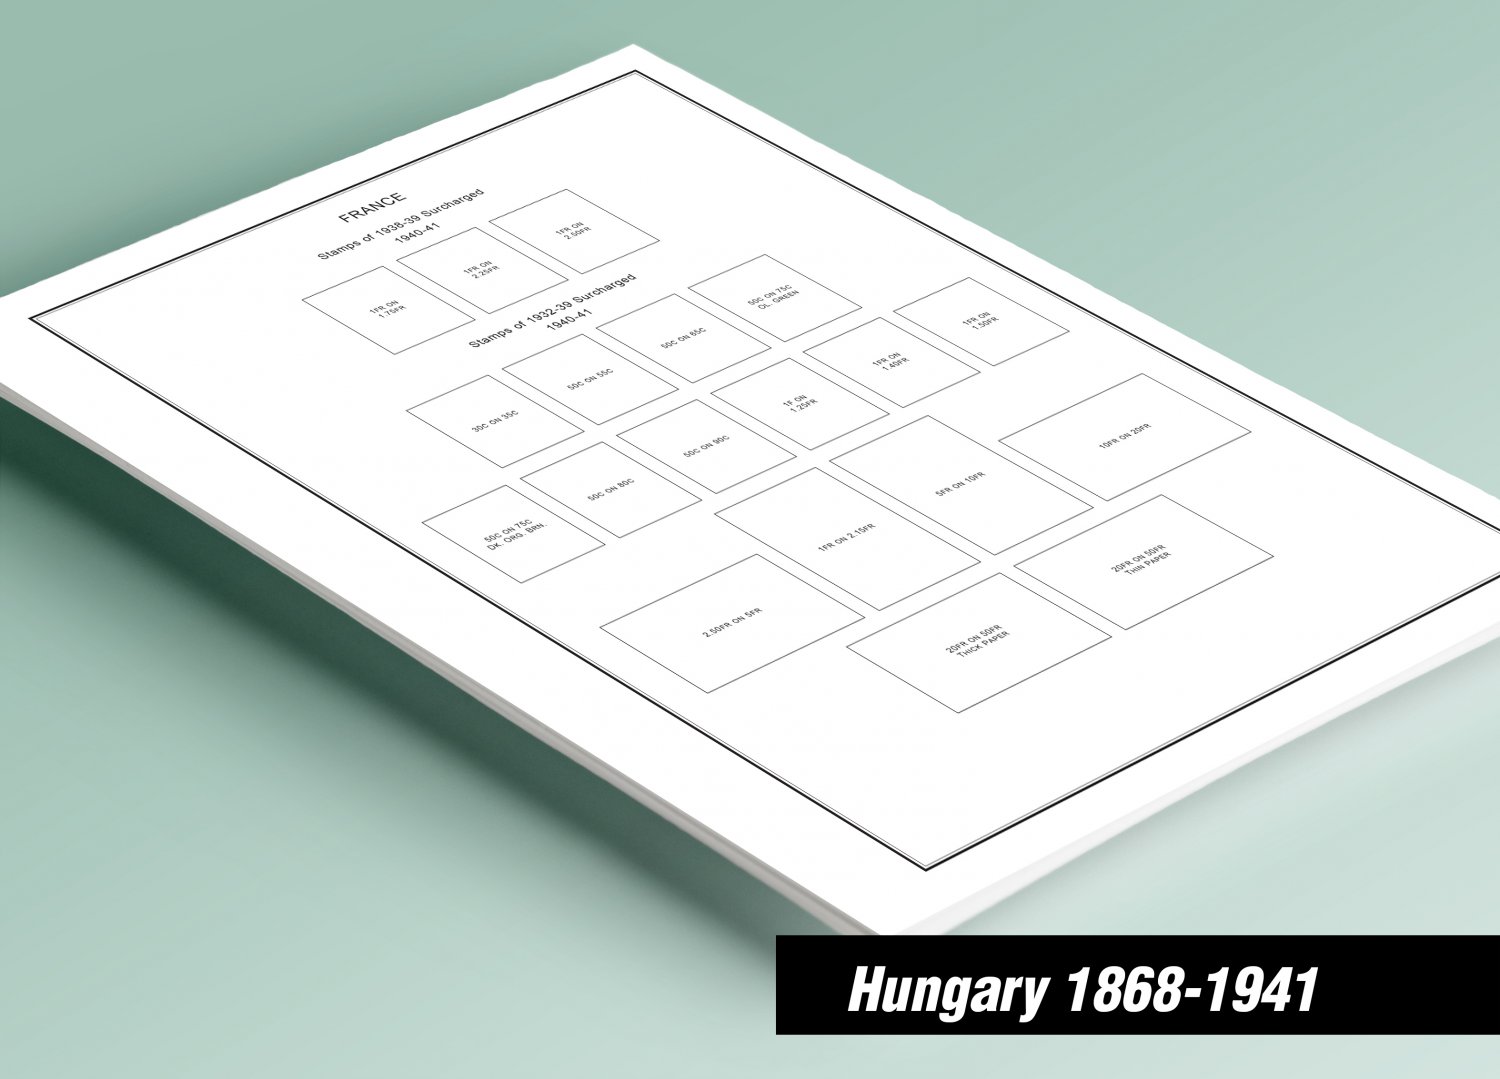 PRINTED HUNGARY [CLASS.] 1868-1941 STAMP ALBUM PAGES (115 pages)